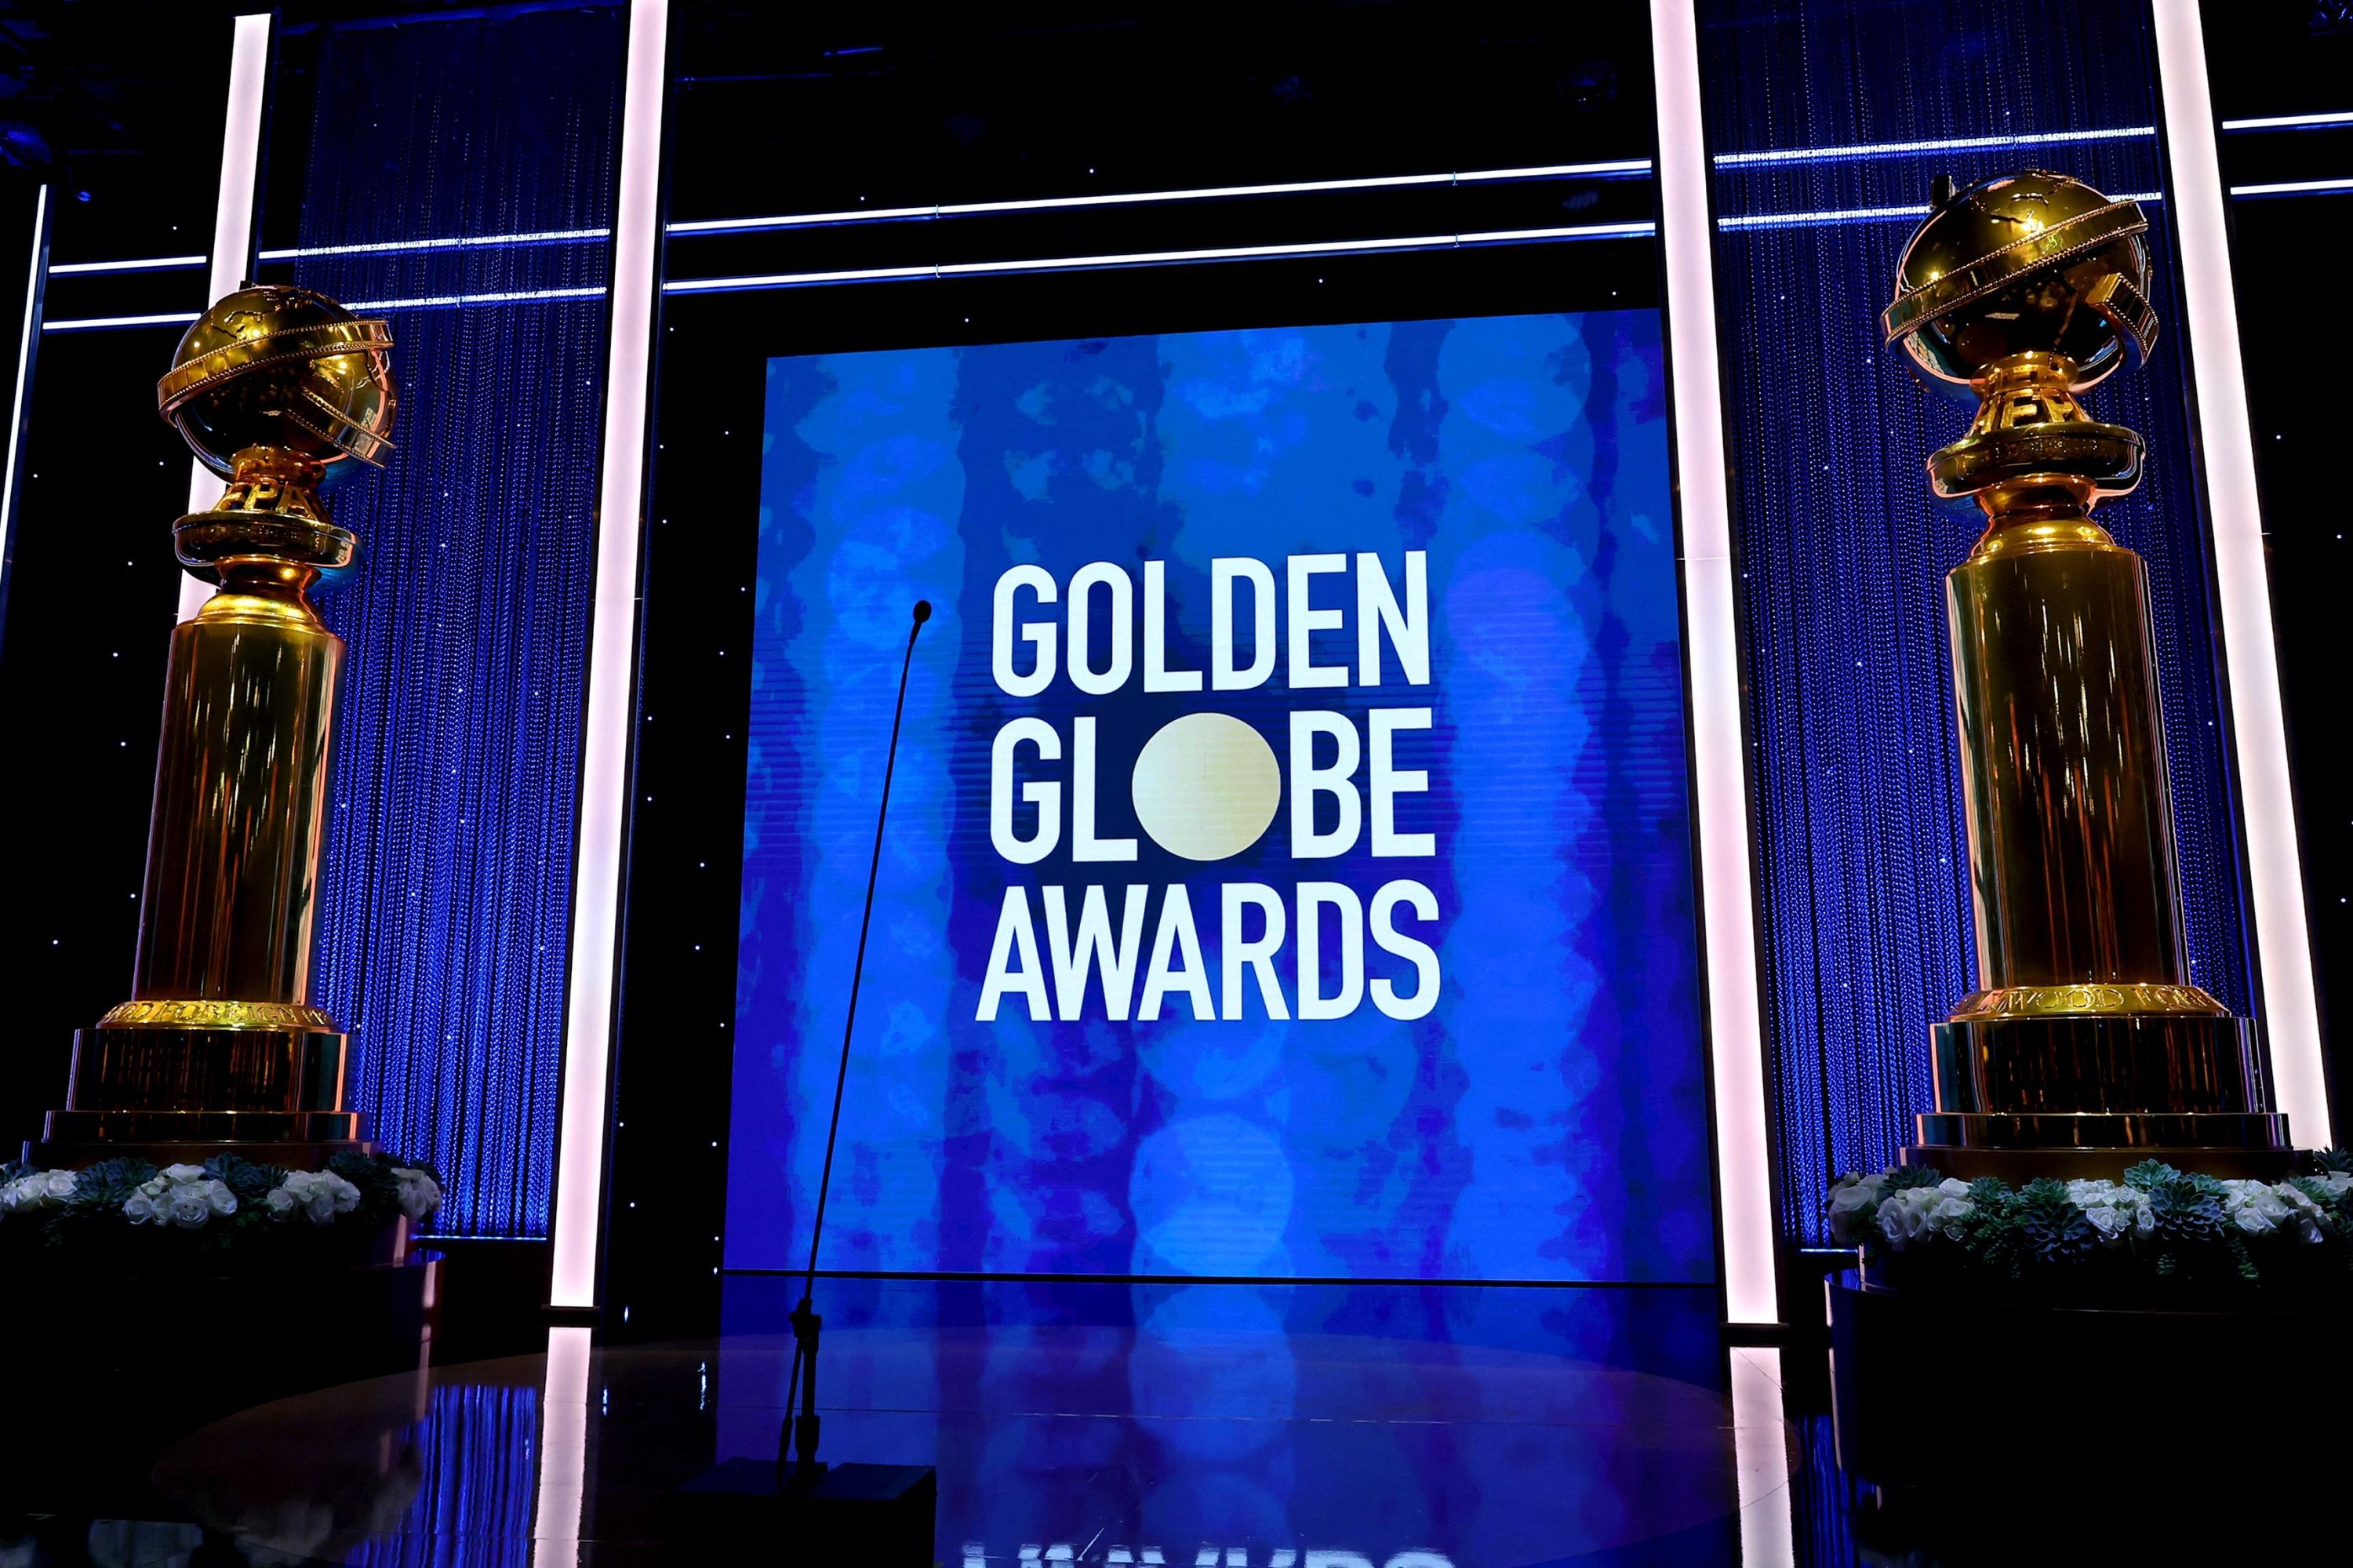 This handout image released by the Hollywood Foreign Press Association (HFPA) shows a view of the stage during the 79th Annual Golden Globe Awards at The Beverly Hilton on January 9, 2022 in Beverly Hills, California. (AFP)